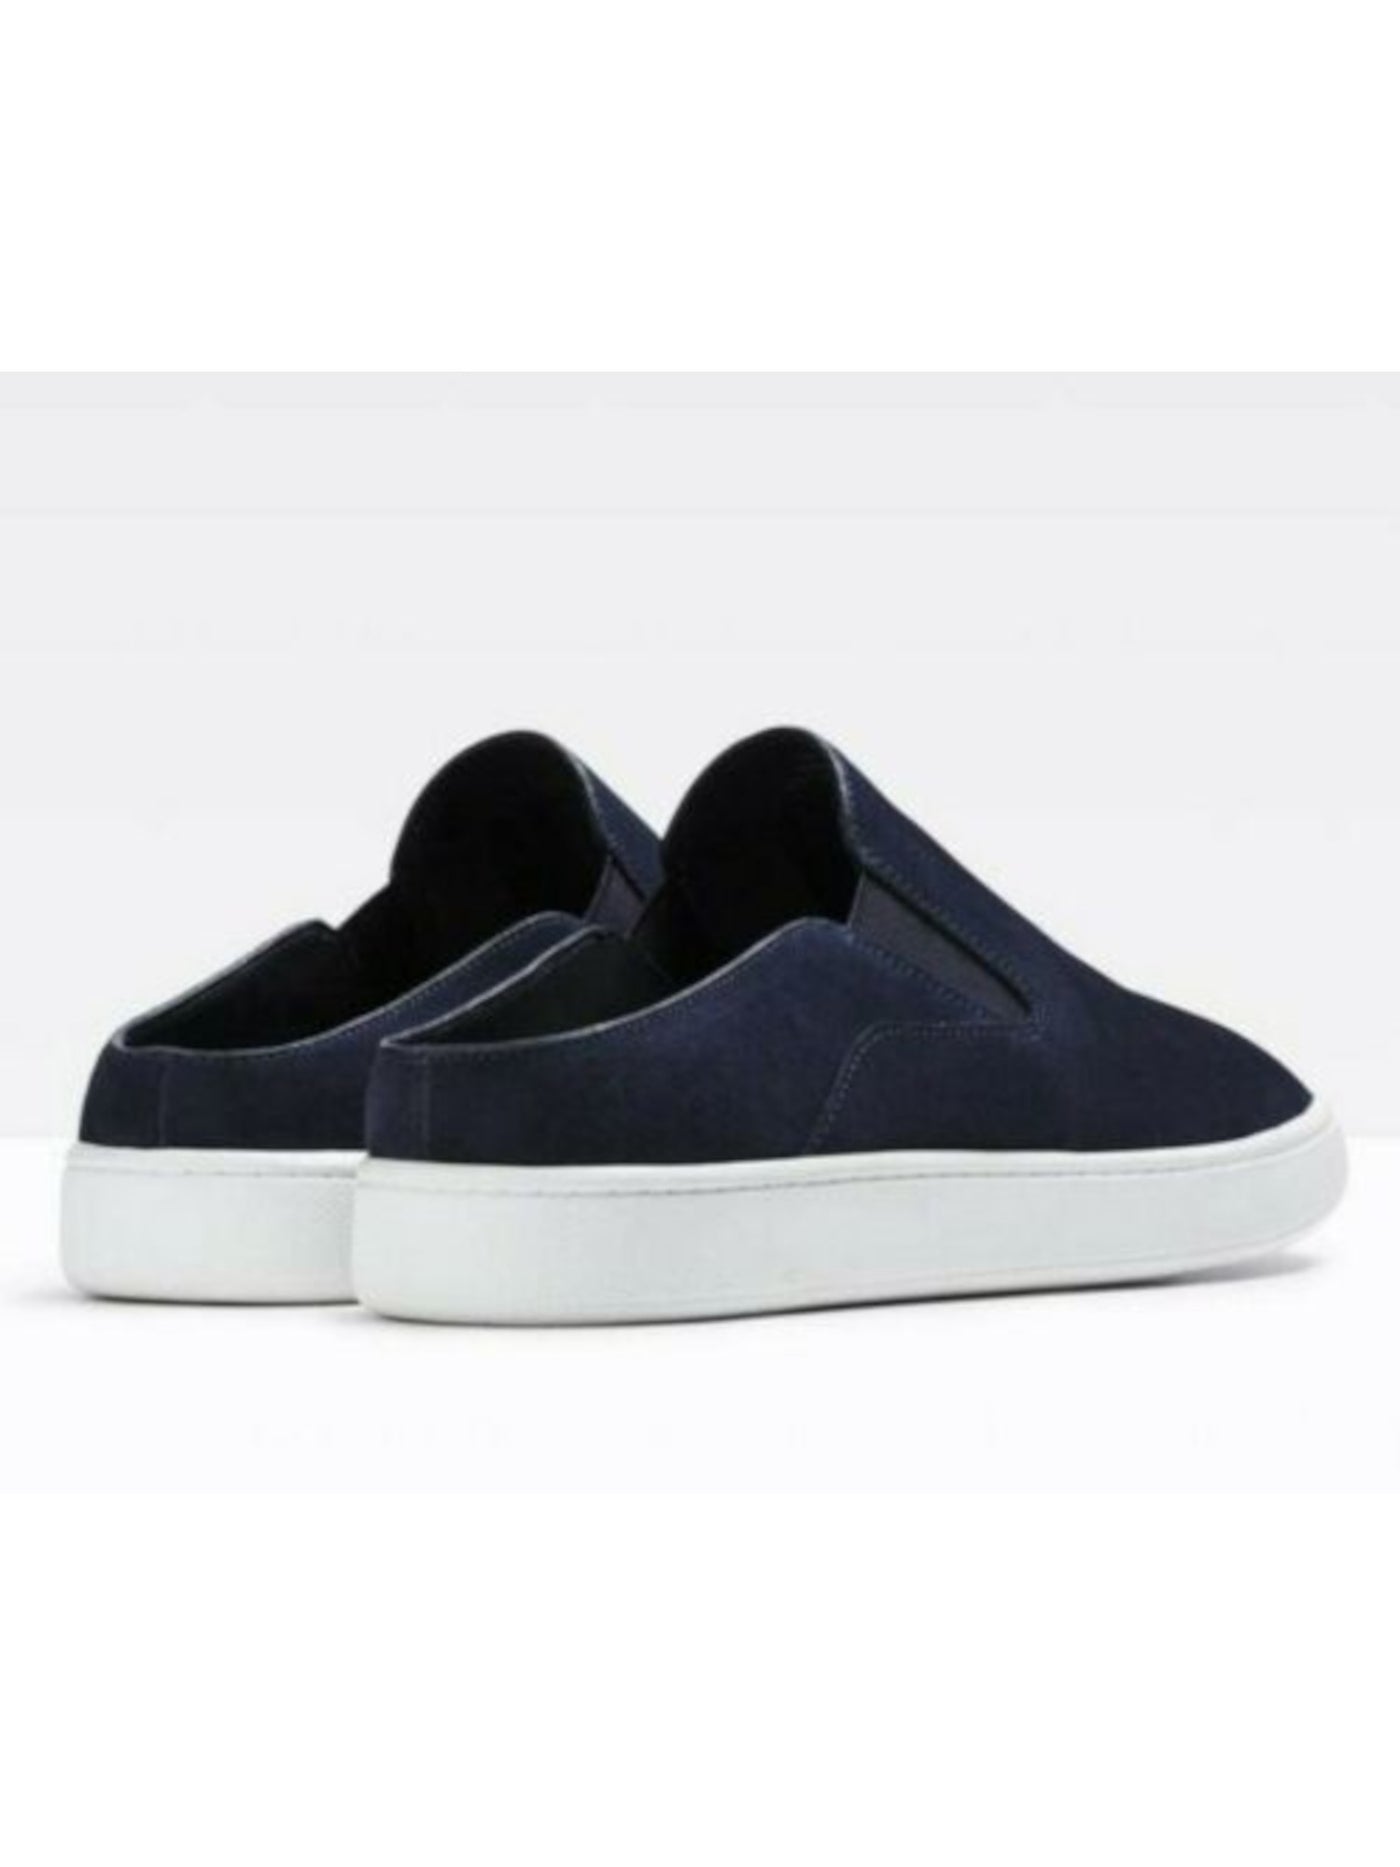 VINCE. Womens Navy Twin Side Gore Comfort Verell Round Toe Platform Slip On Leather Athletic Sneakers Shoes 5.5 M